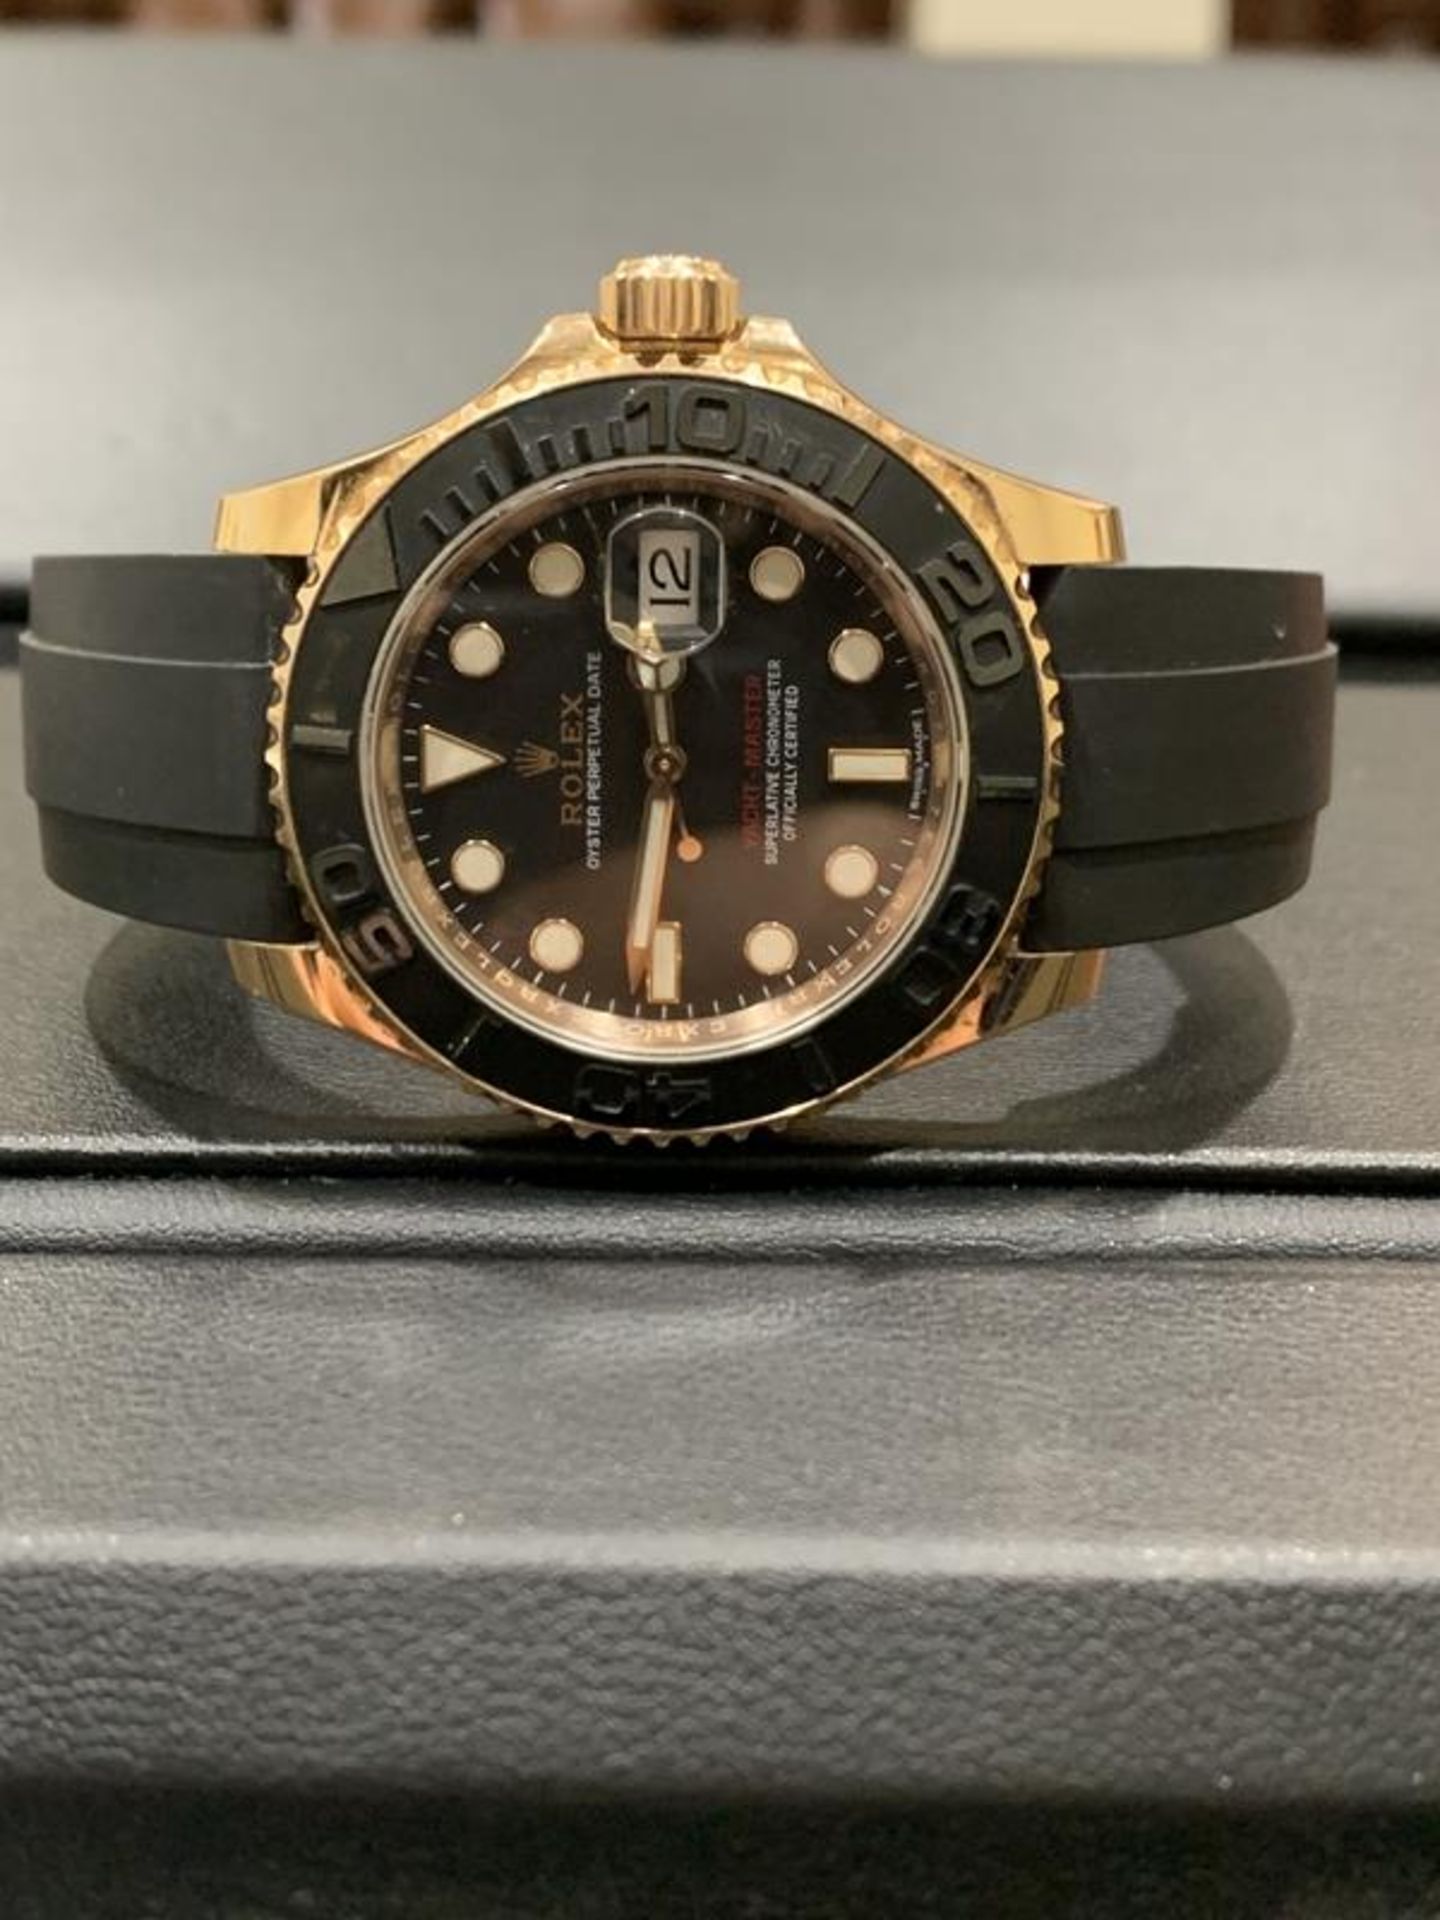 ROLEX Yacht-Master Mens 40mm everose gold, black face - no box or paperwork included - Serial: - Image 5 of 7